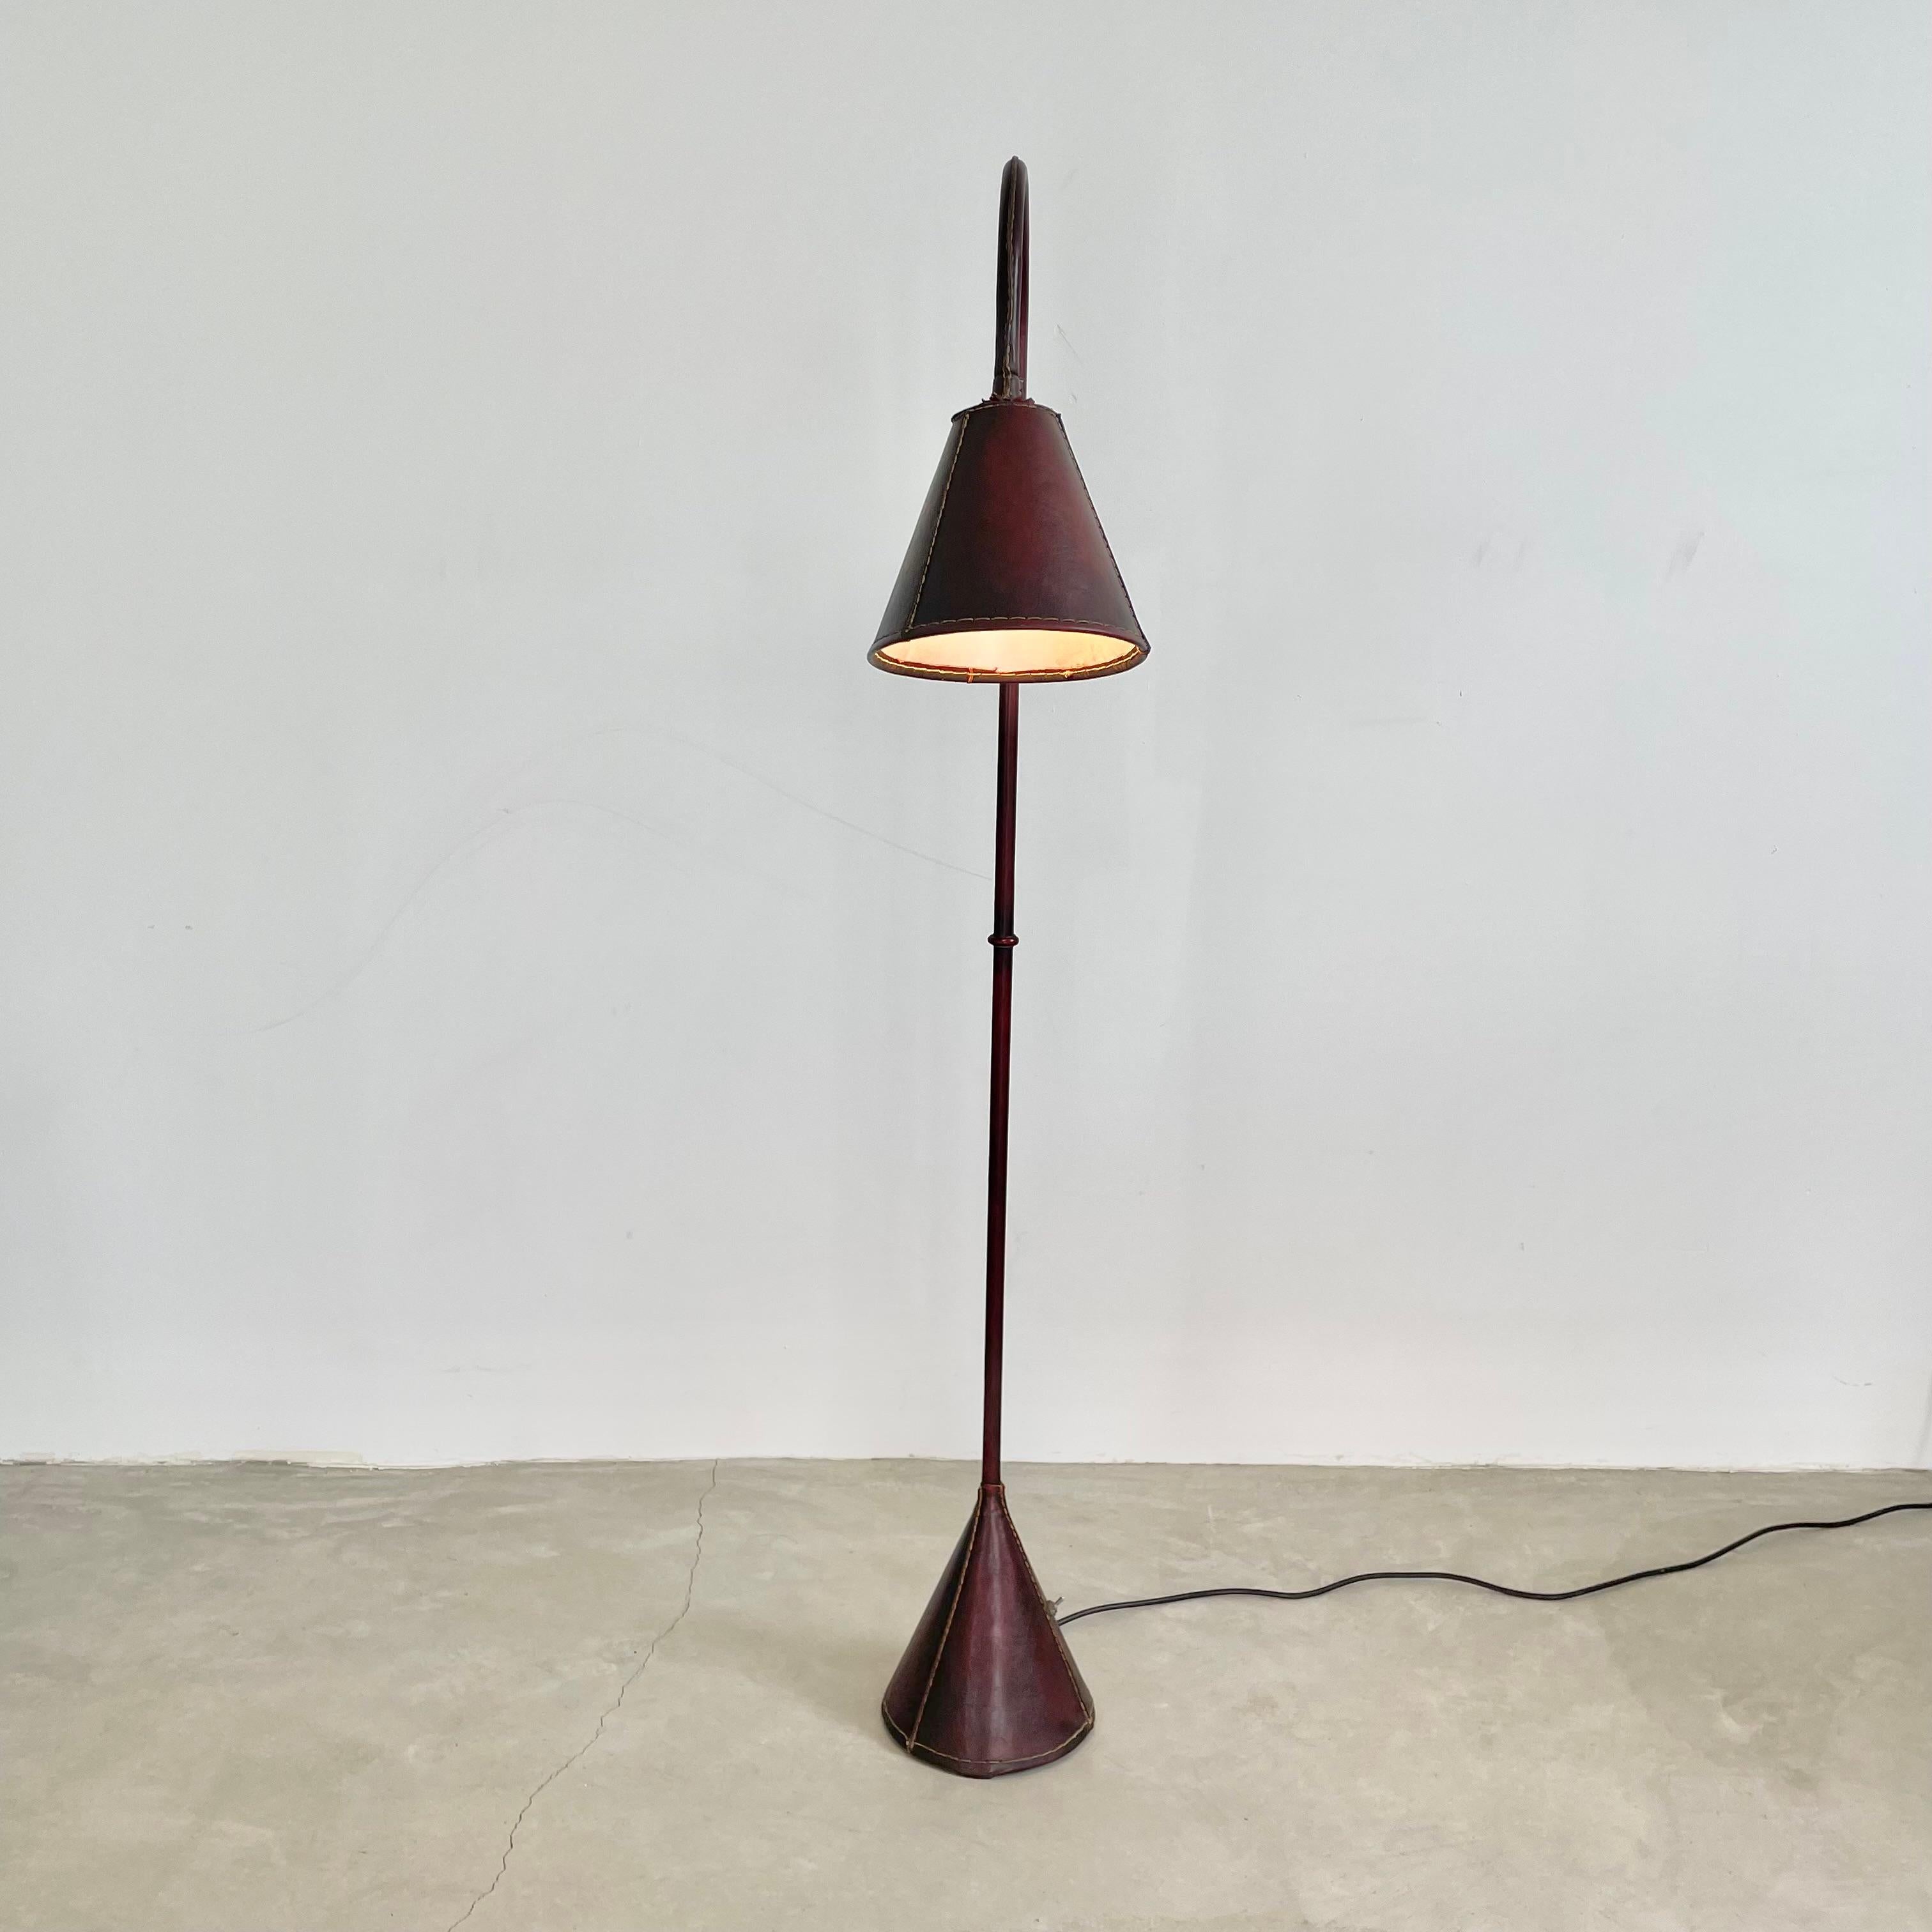 Handsome leather arched floor lamp by Spanish design house, Valenti. Based in Barcelona and founded over 200 years ago, Valenti has deep roots in high end furniture and elegant designs. Made in the 1970s this floor lamp is completely wrapped in a